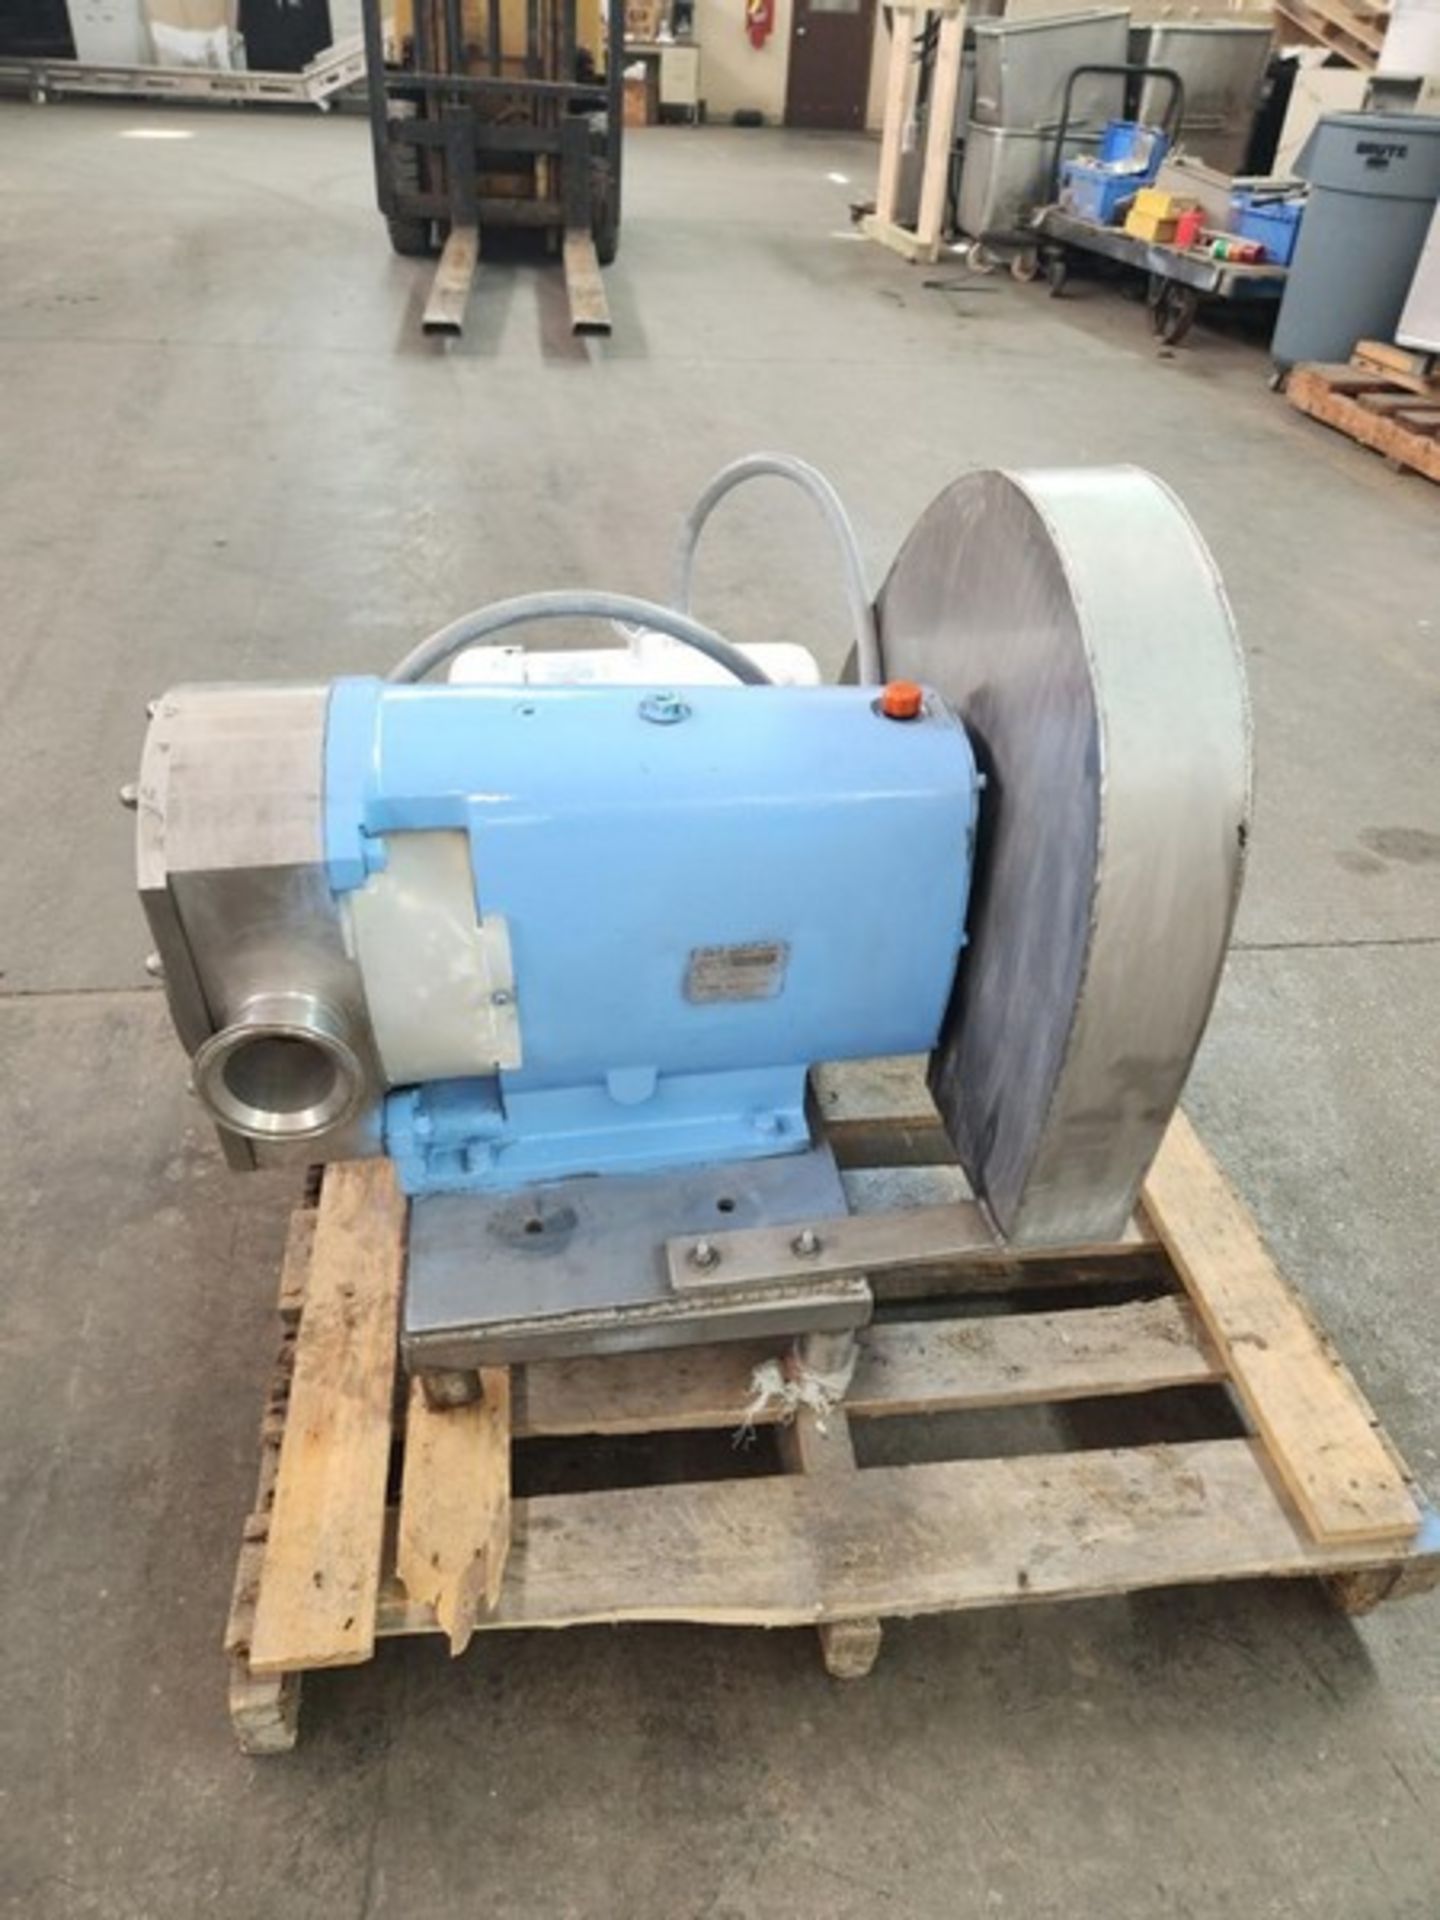 G H (Alfa Laval) 7.5 hp 4" S/S Sanitary Positive Displacement Pump, Model 822, S/N 95-8-50174 with - Image 15 of 15